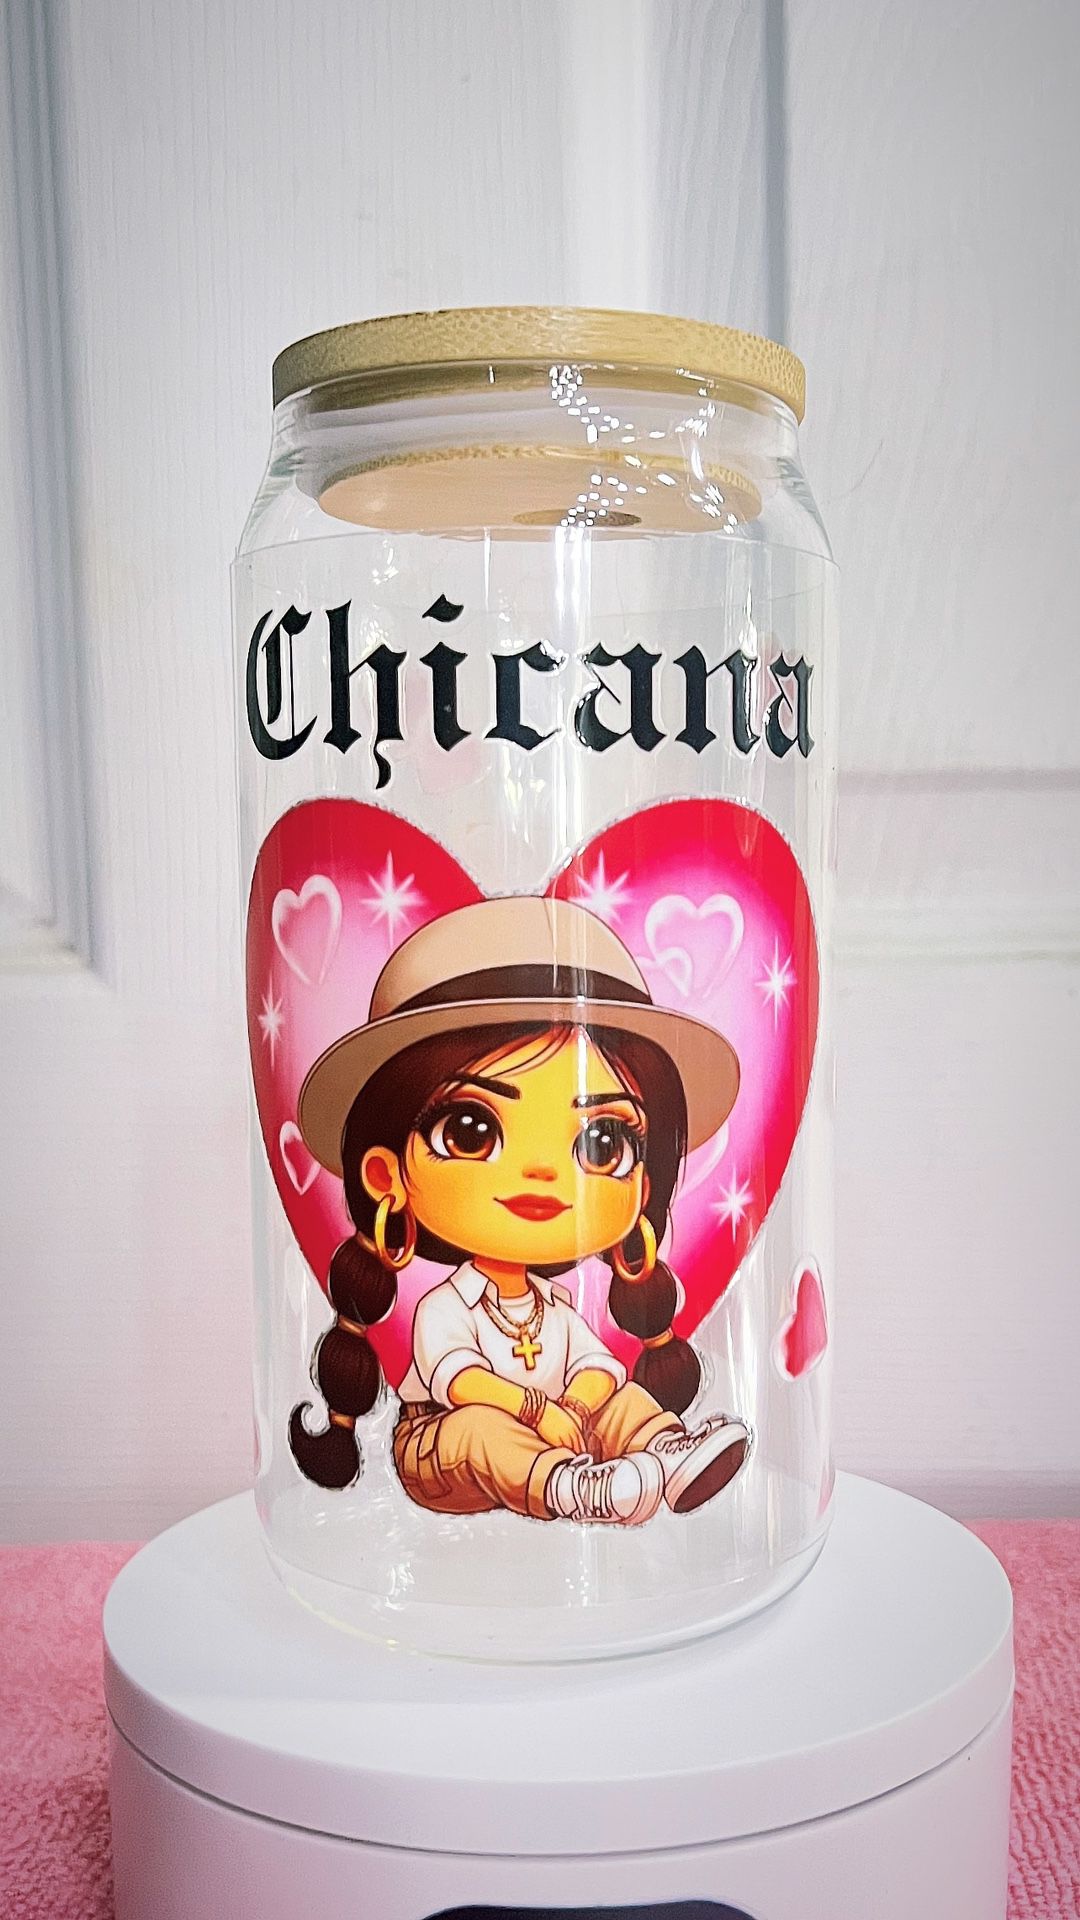 Chicana Glass Cup (Includes Glass Straw) 16oz